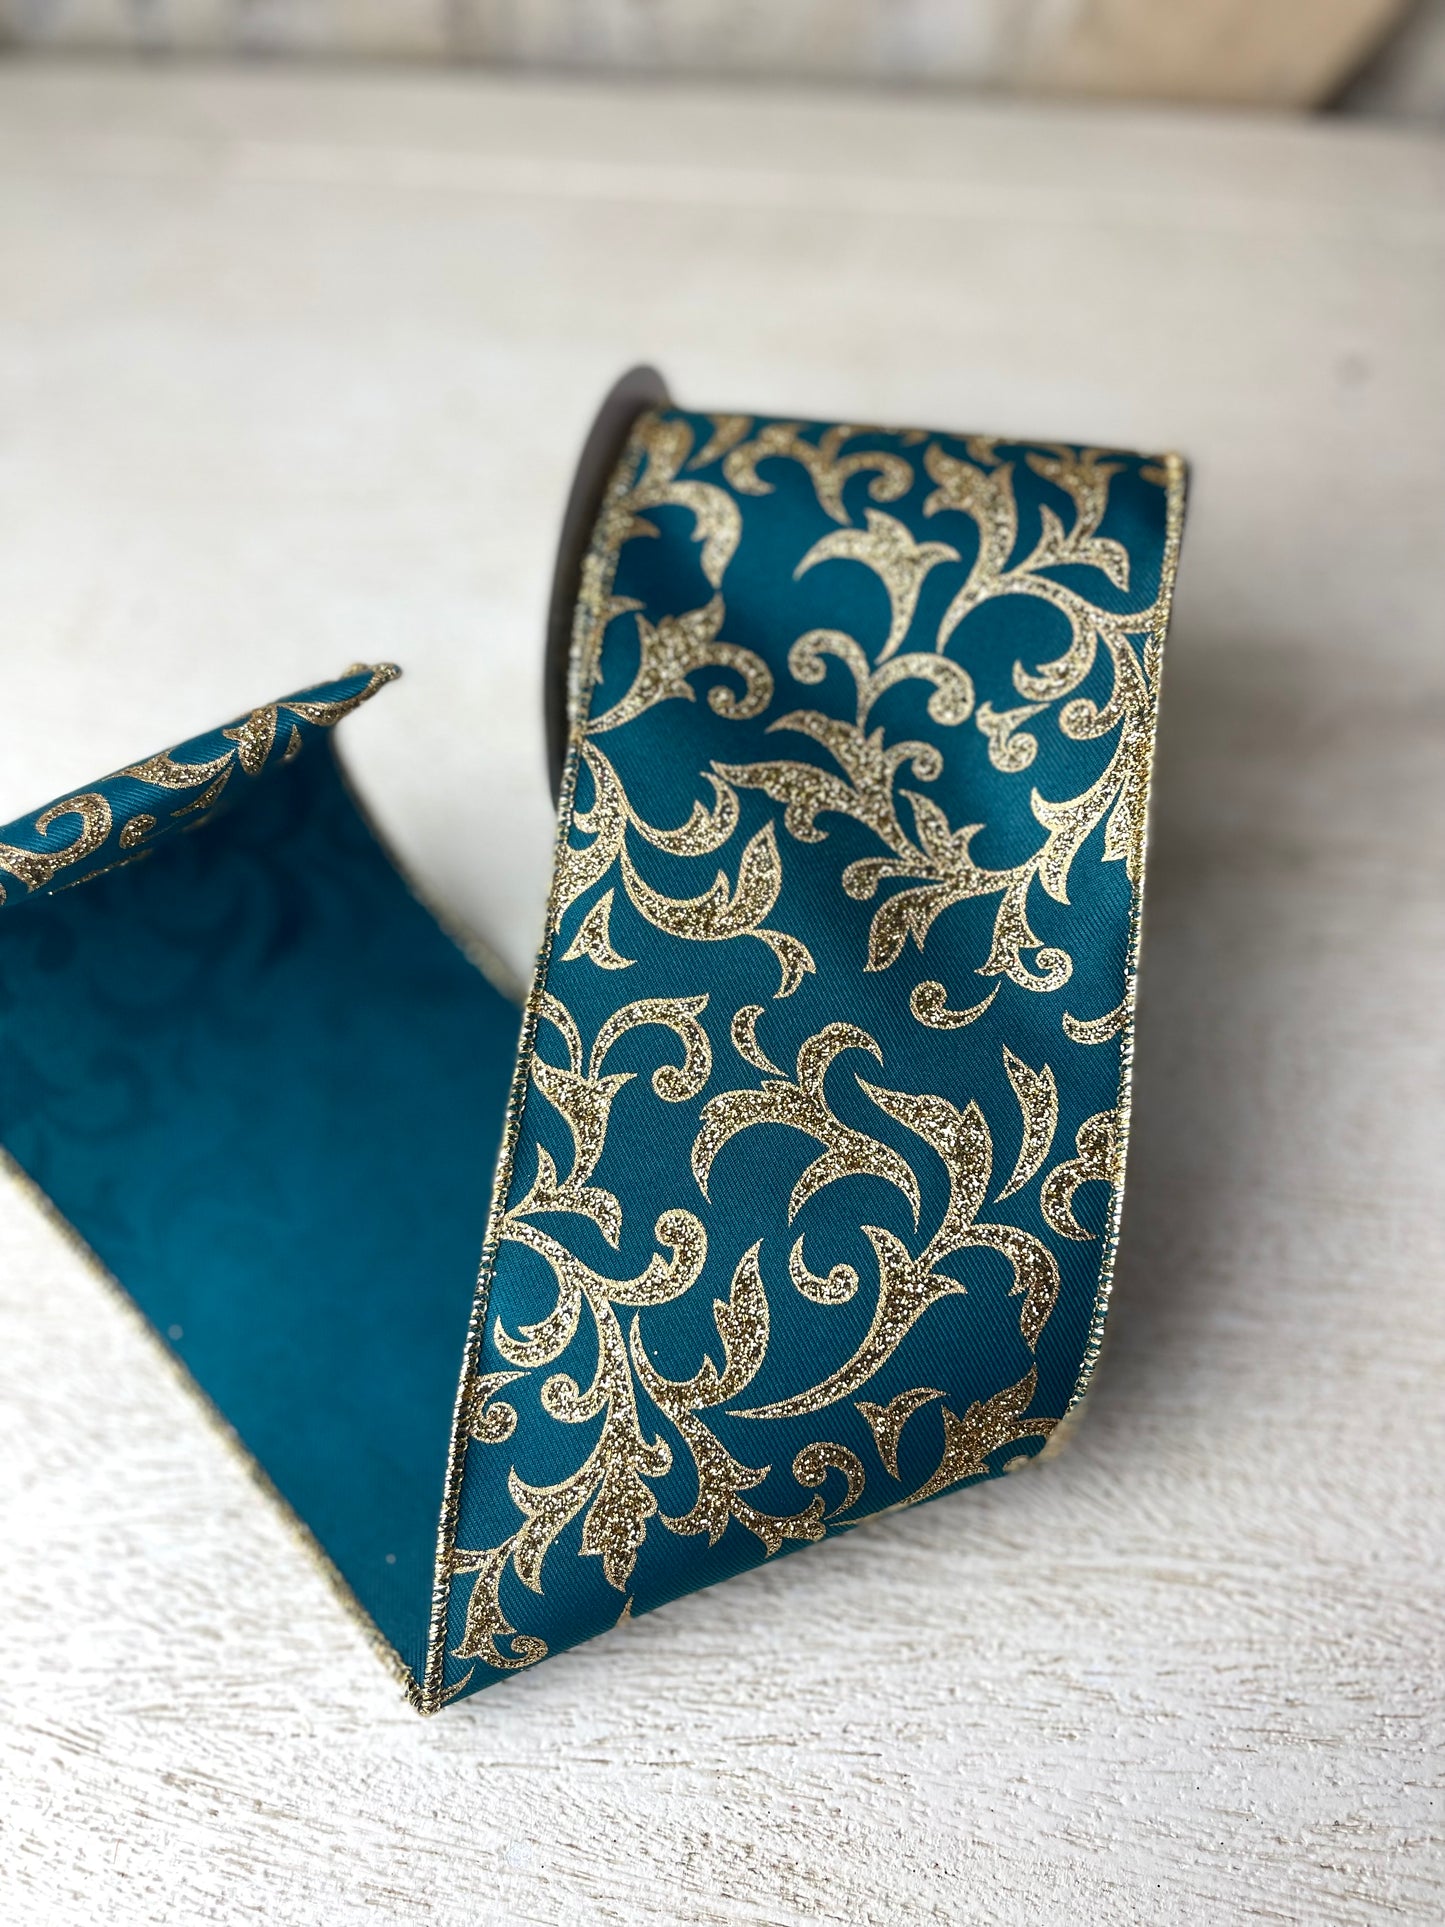 4 Inch By 10 Yard Teal Background With Gold Acanthus Leaf Ribbon